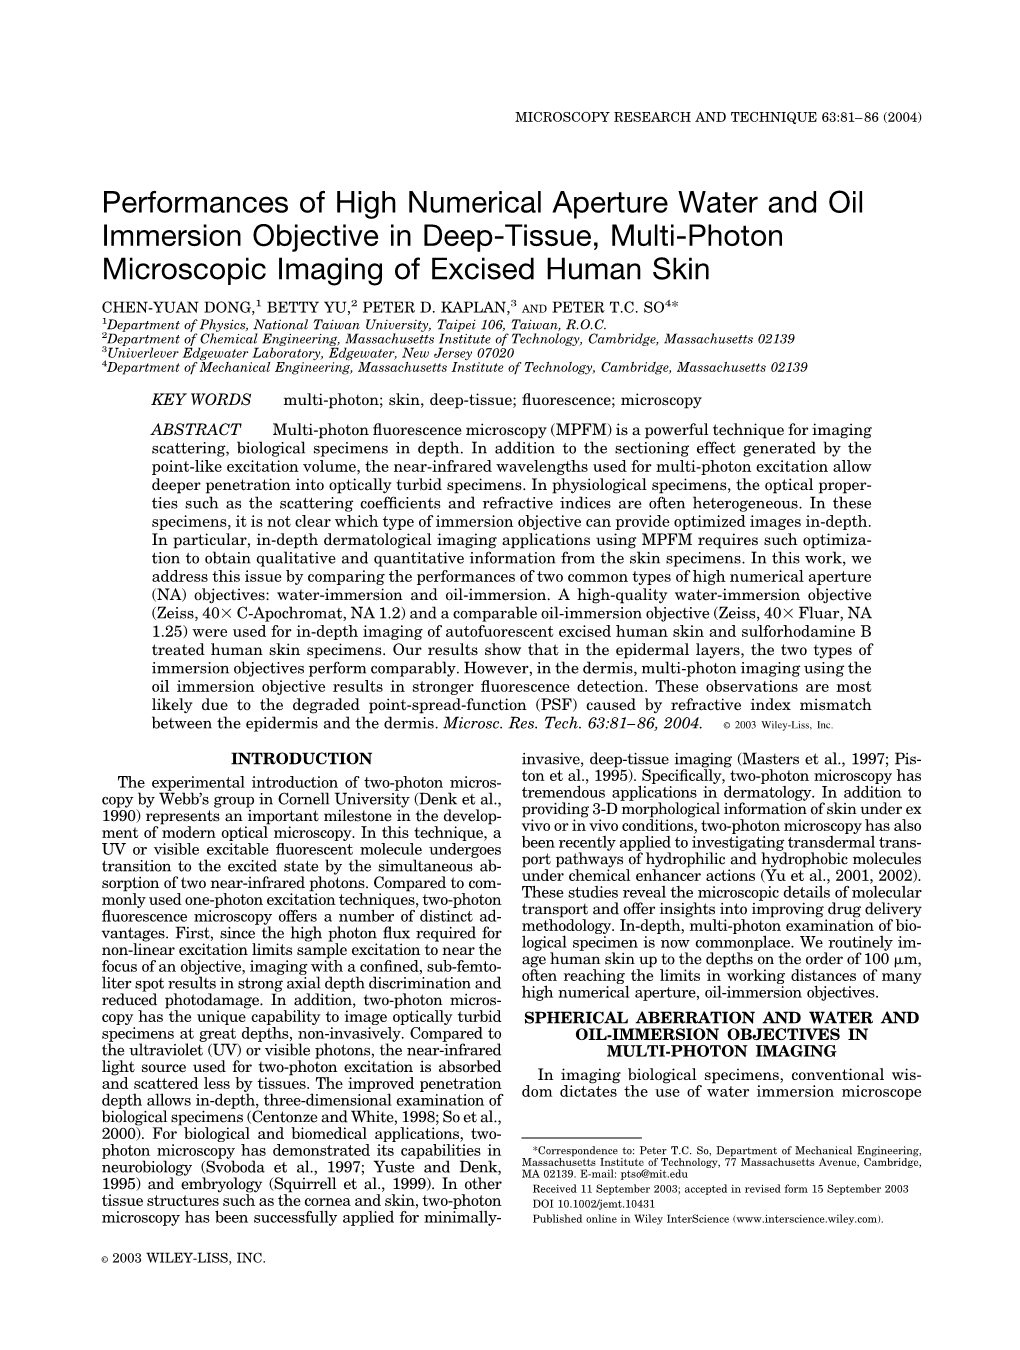 Performances of High Numerical Aperture Water and Oil Immersion Objective in Deep-Tissue, Multi-Photon Microscopic Imaging of Excised Human Skin